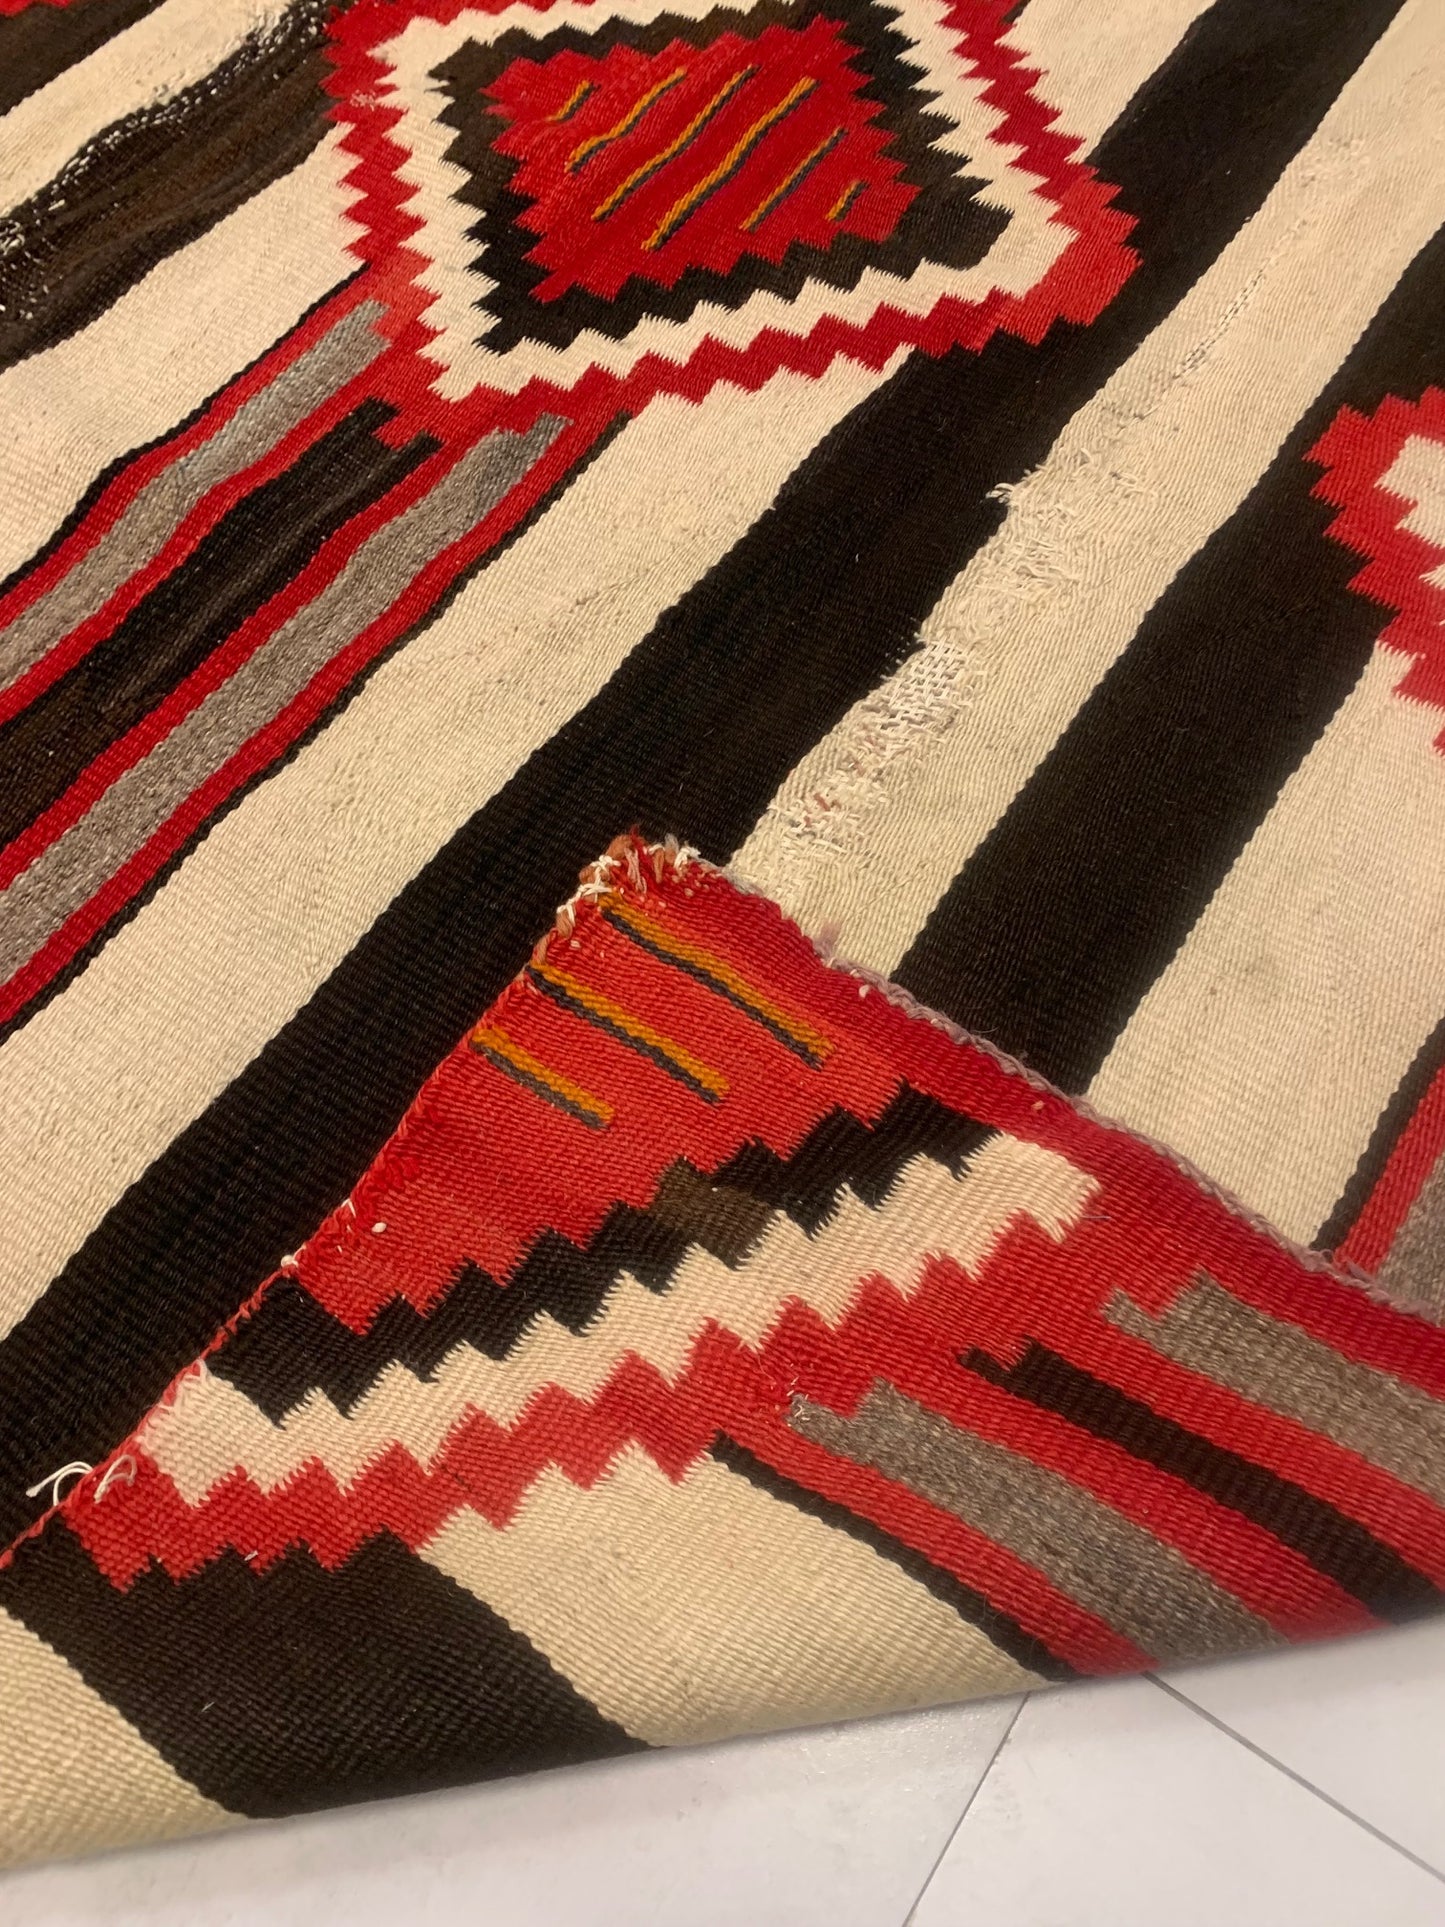 Frayed Edges and Subtle Imperfections Testifying to Authenticity of Handmade American Navajo Rug - 1880s